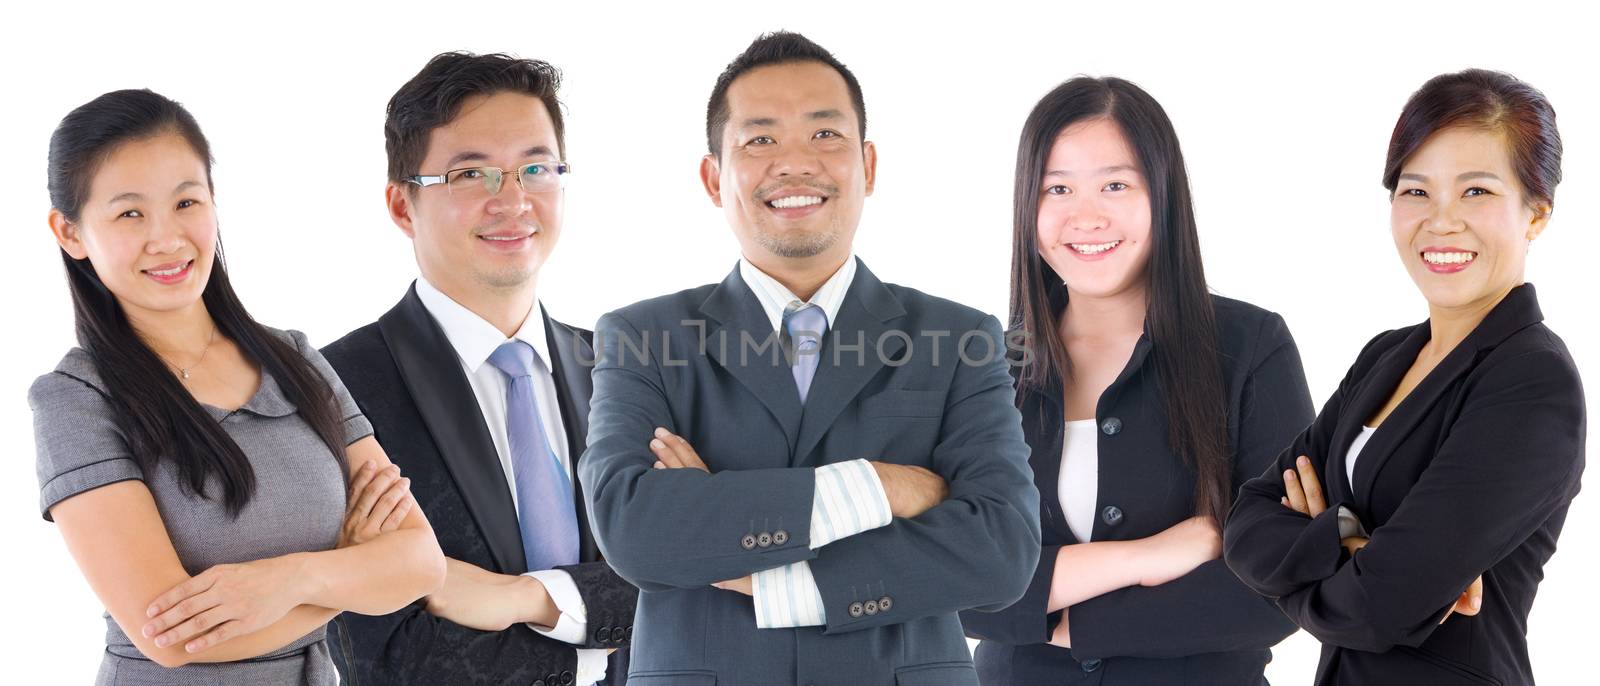 Group of Asian business people by yongtick